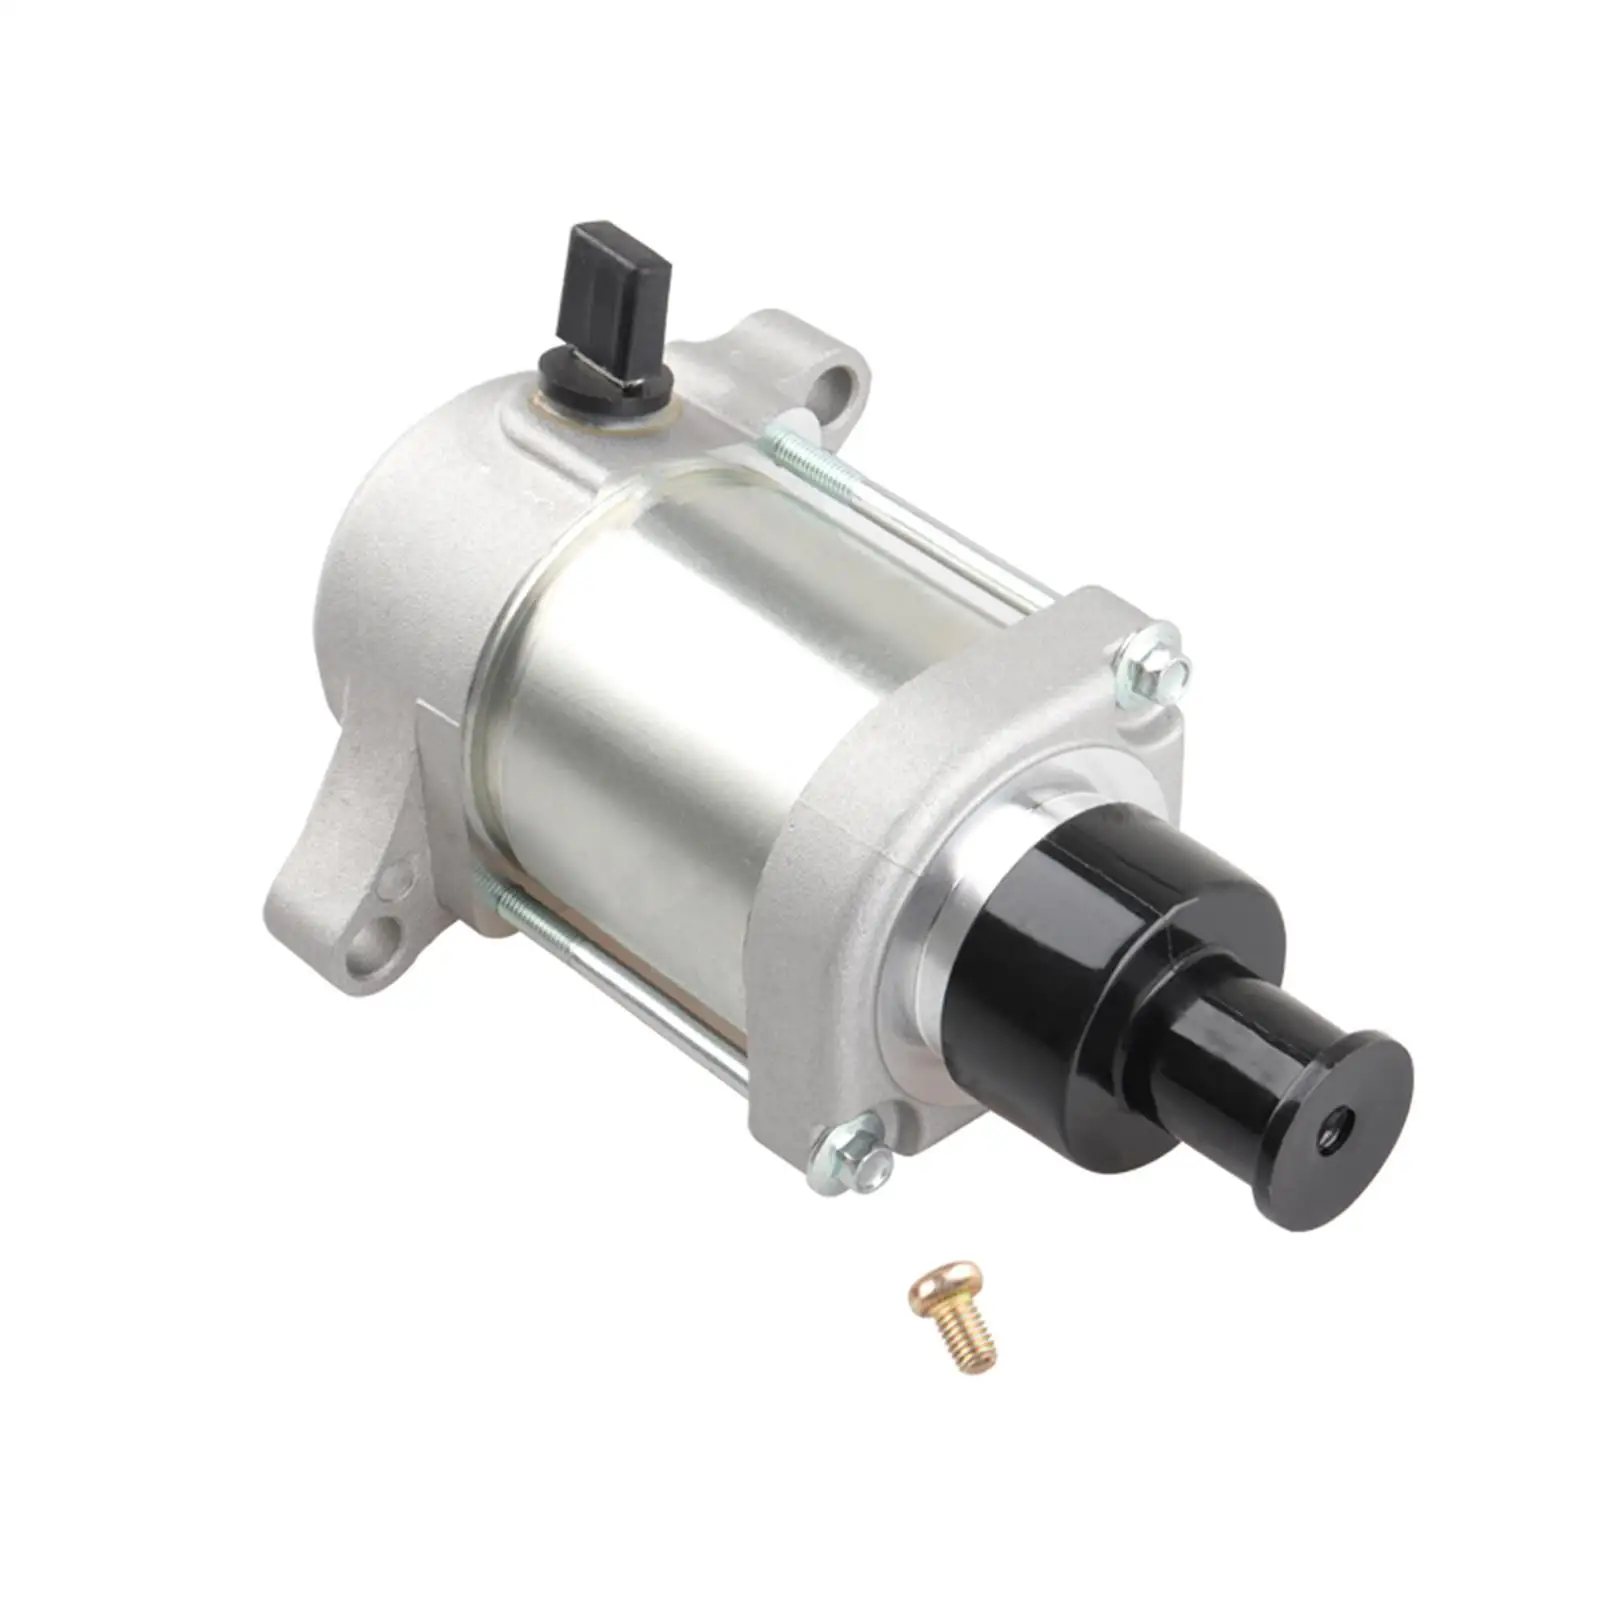 Electrical Engine Starter Motor Repair Parts 9T for Aprilia RXV450 RXV550 Sxv550 Sxv450 Convenient Installation Lightweight